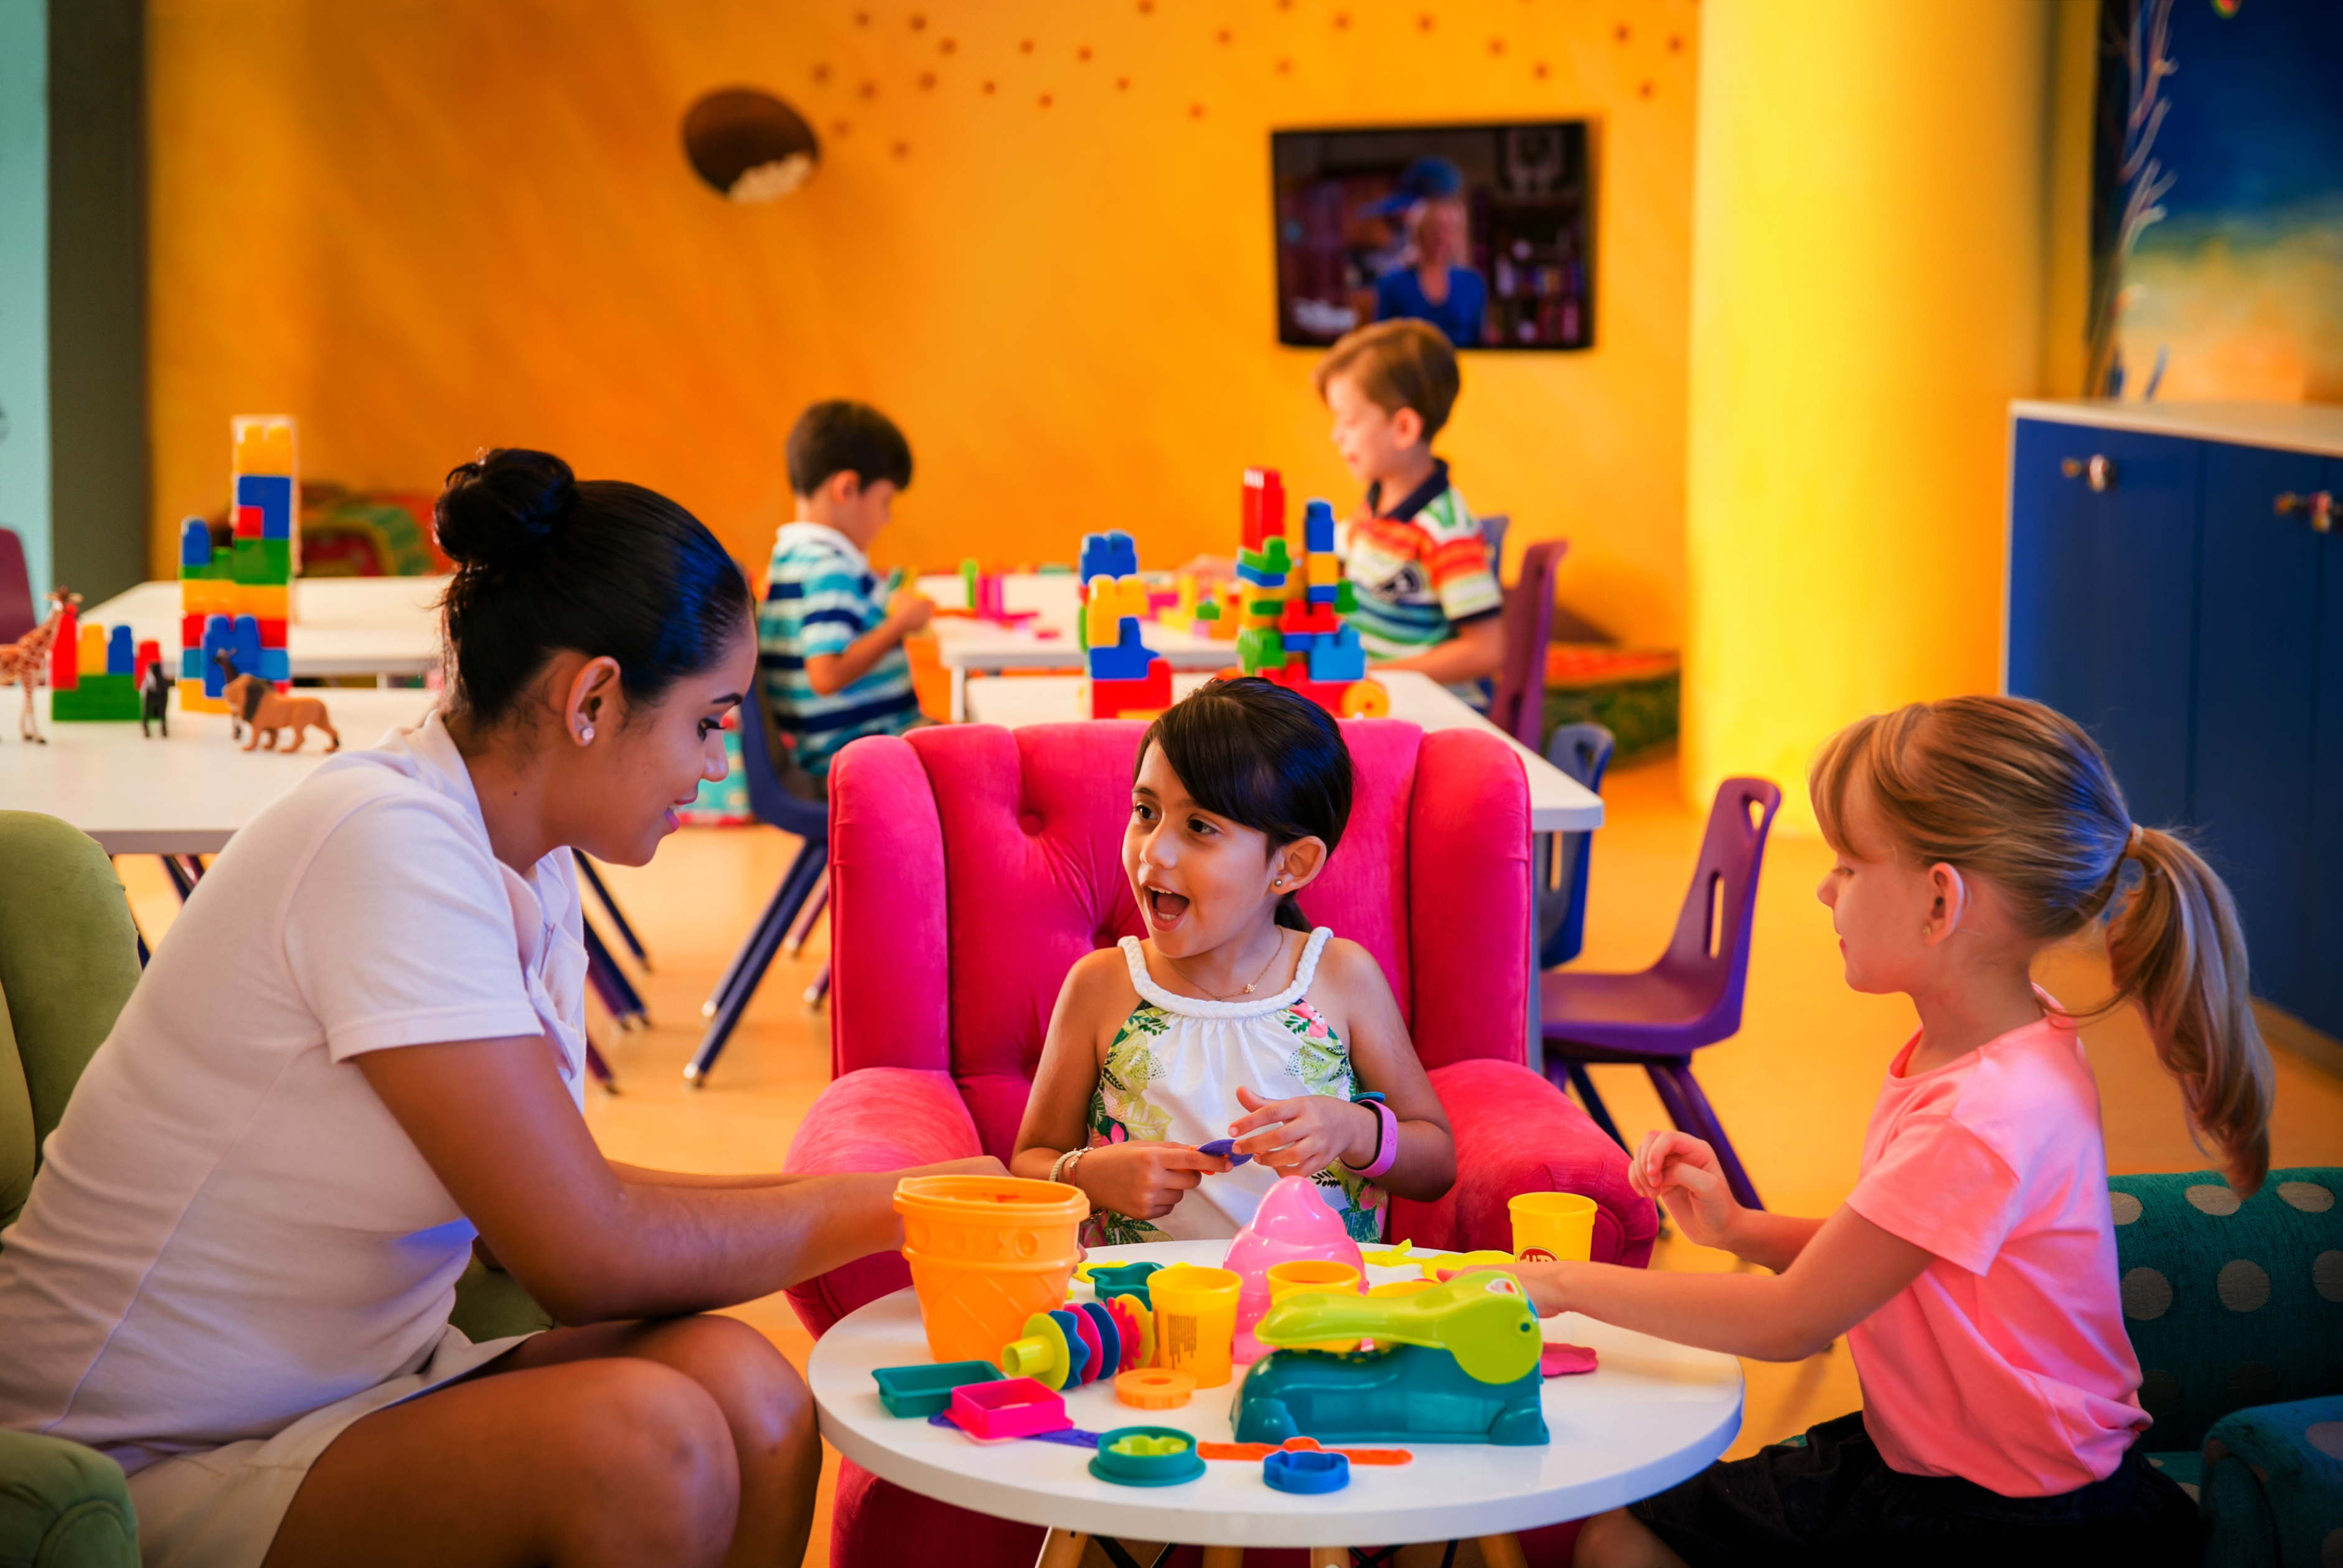 Hotels and resorts that offer childcare services, like the Velas Vallarta, pictured here, are a big hit with families.